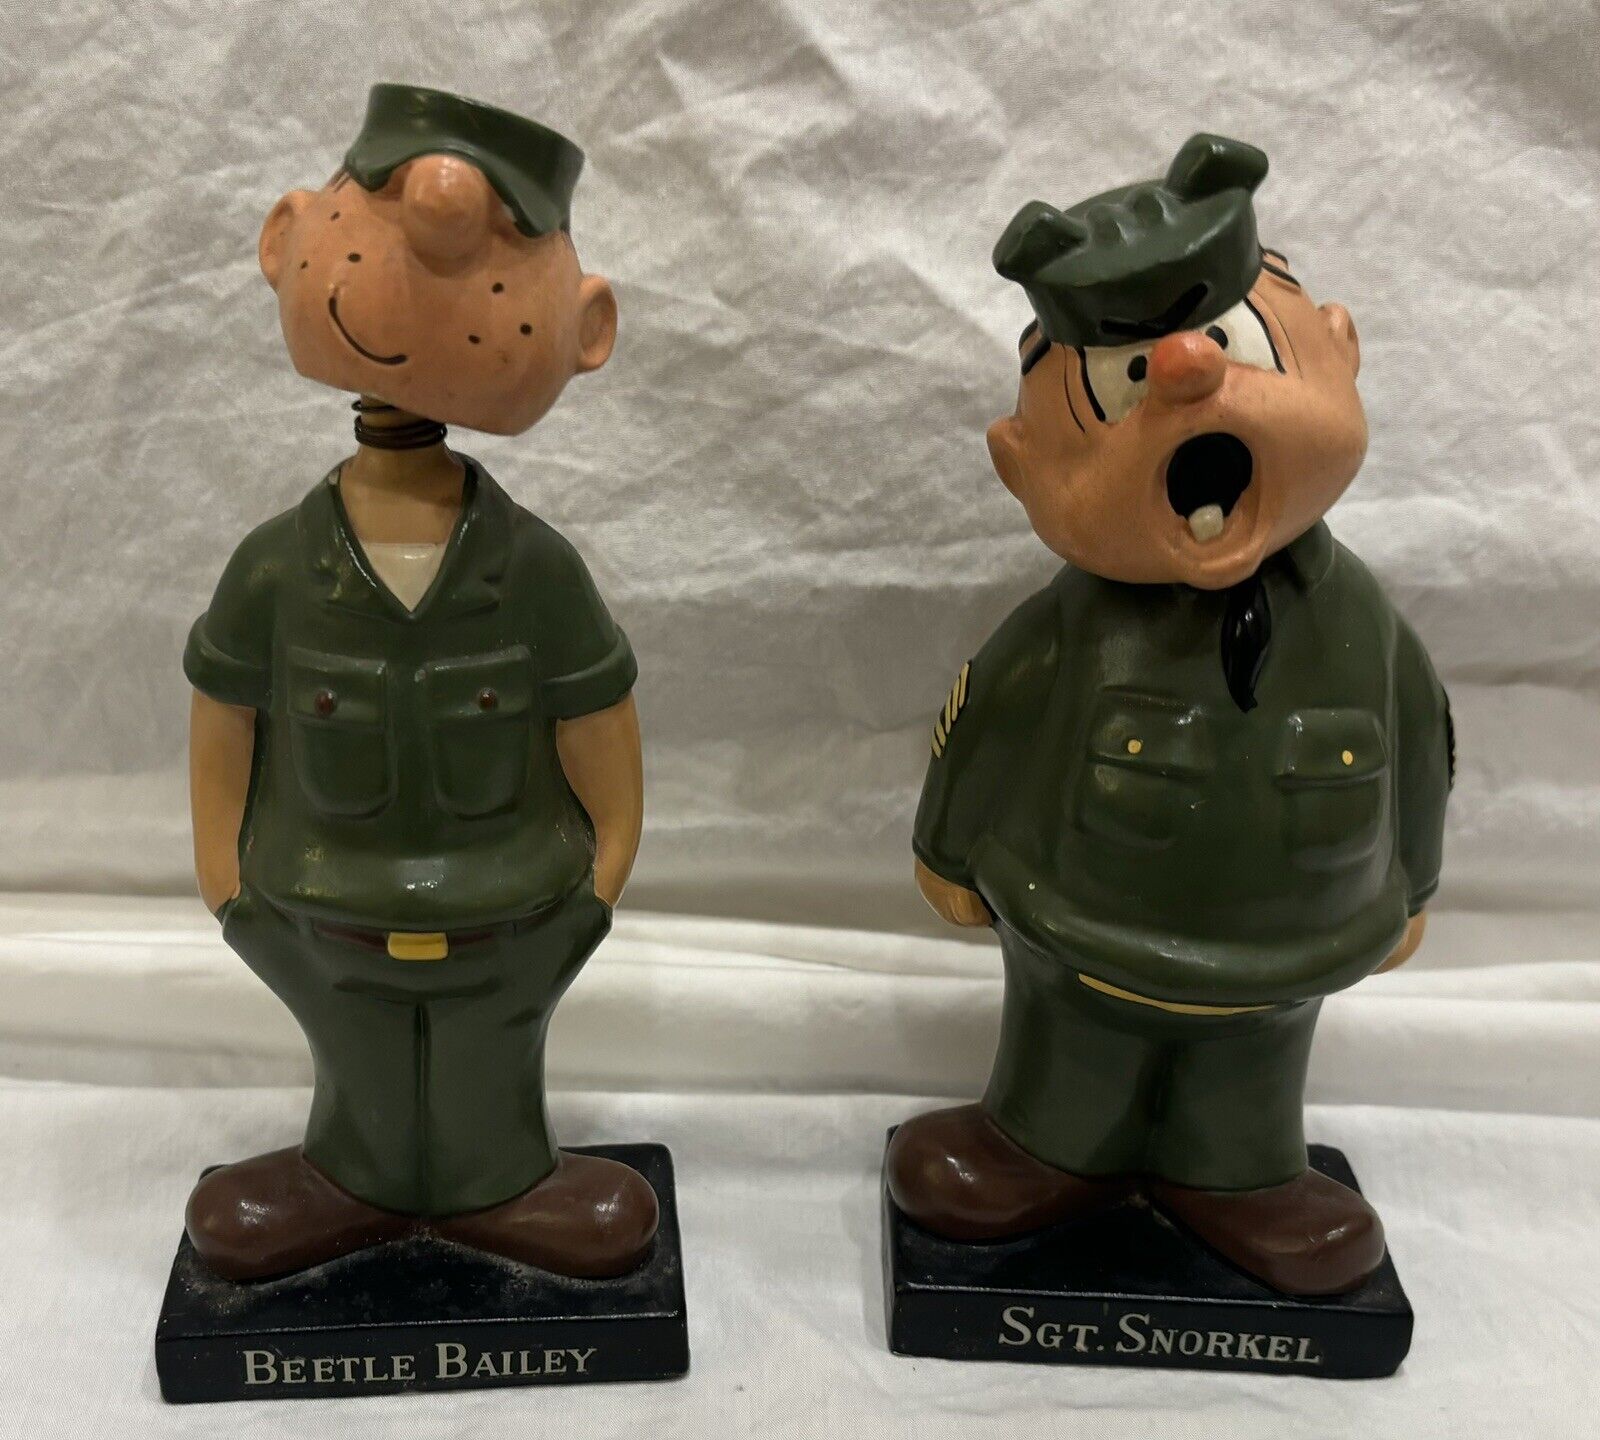 Beetle Baily And Sgt Snorkel bobble heads Very Rare Nice Condition King Features